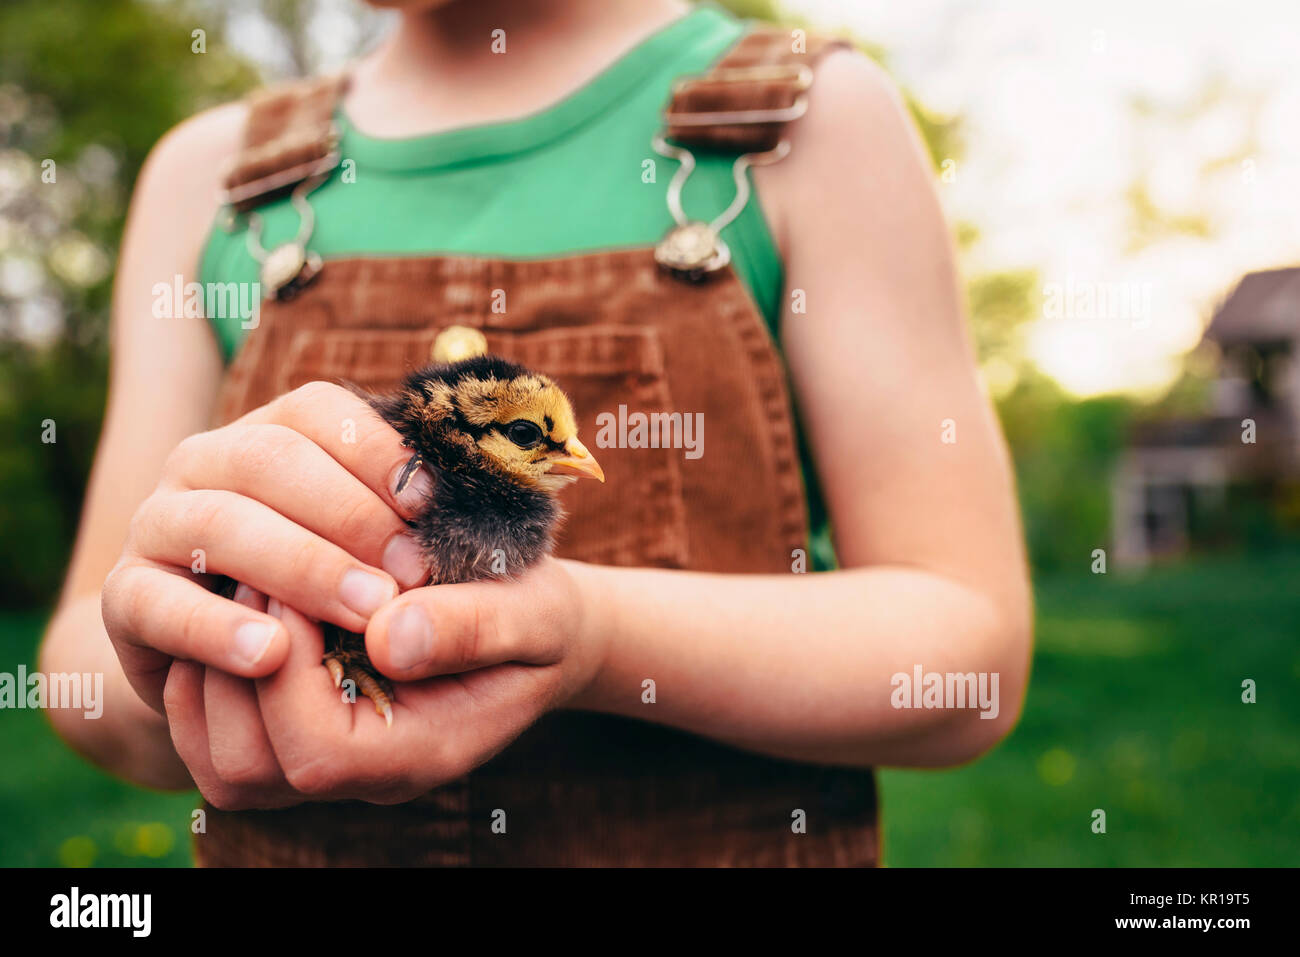 Boy standing in a garden holding a chick Stock Photo